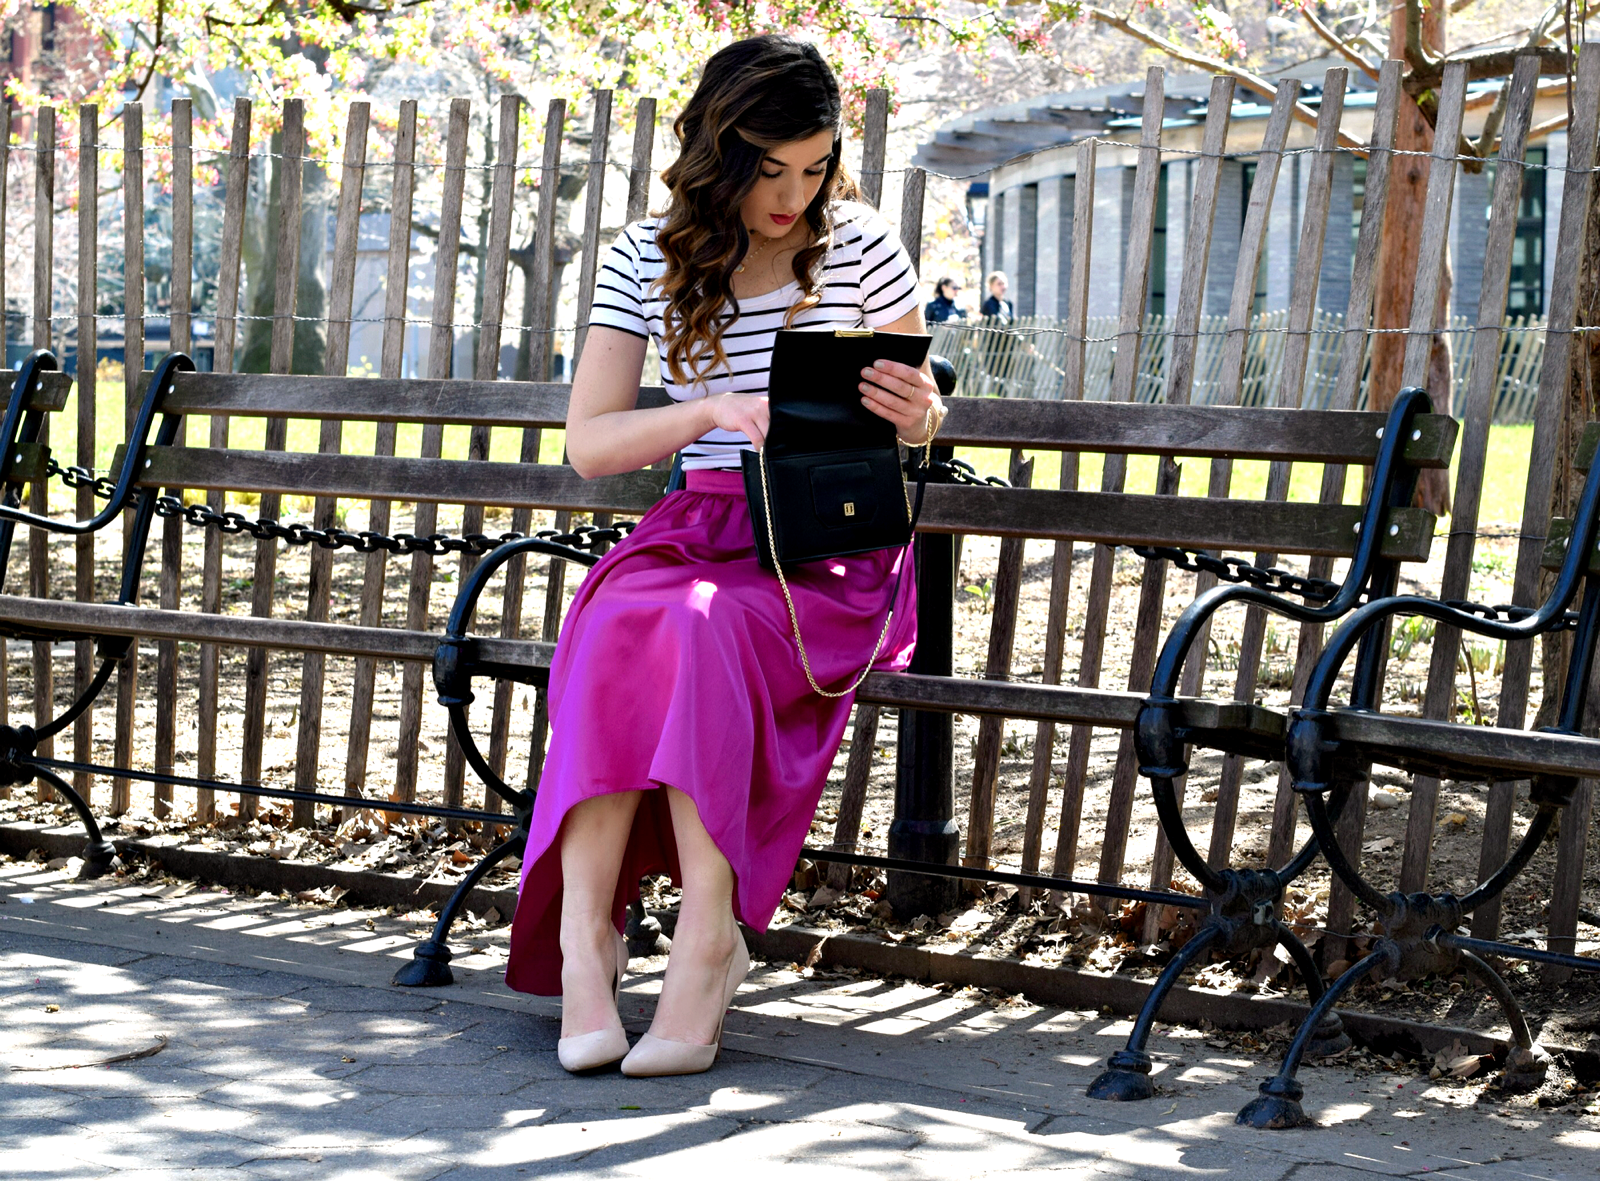 Fuchsia Party Skirt More Than Just Figleaves Louboutins & Love Fashion Blog Esther Santer NYC Street Style Blogger Outfit OOTD Midi Photoshoot Girl Women Striped Tee Ivanka Trump Black Purse Choker Bracelet Gold Jewelry Nude Heels Shoes Steve Madden.jpg